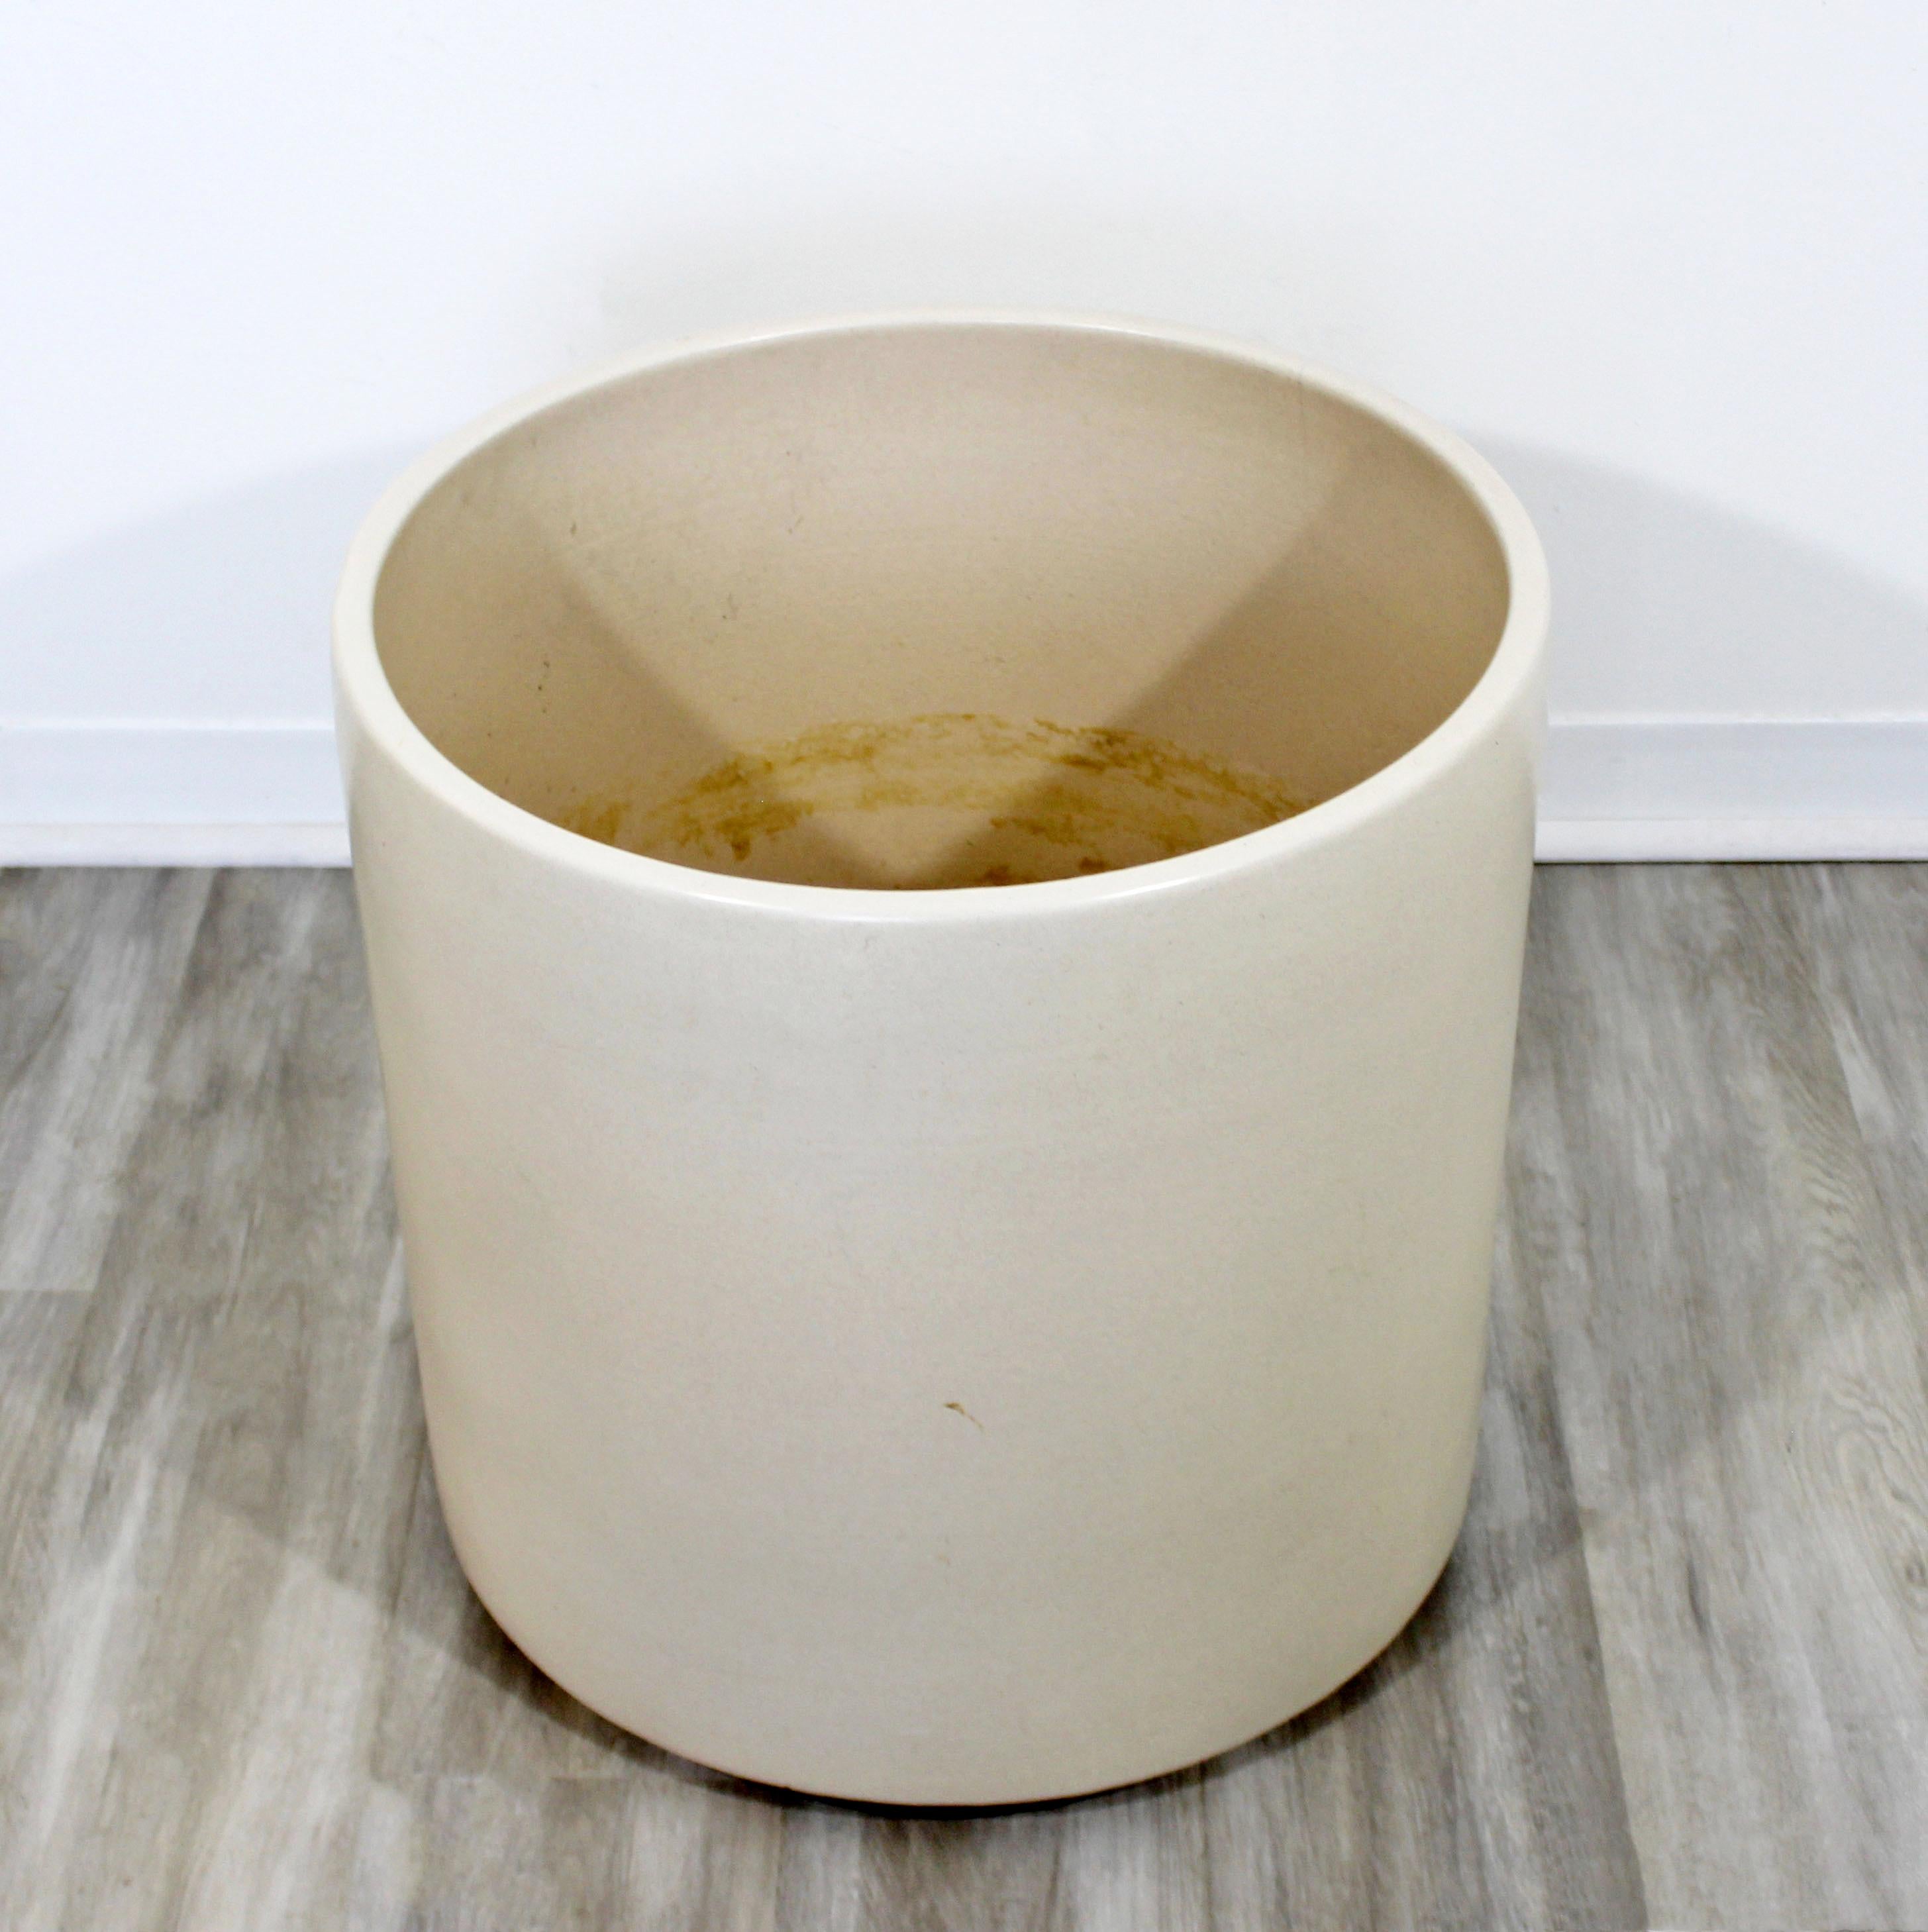 For your consideration is a large, white ceramic, architectural planter, by Gainey Ceramics, circa 1960s-1970s. In good vintage condition. The dimensions are 20